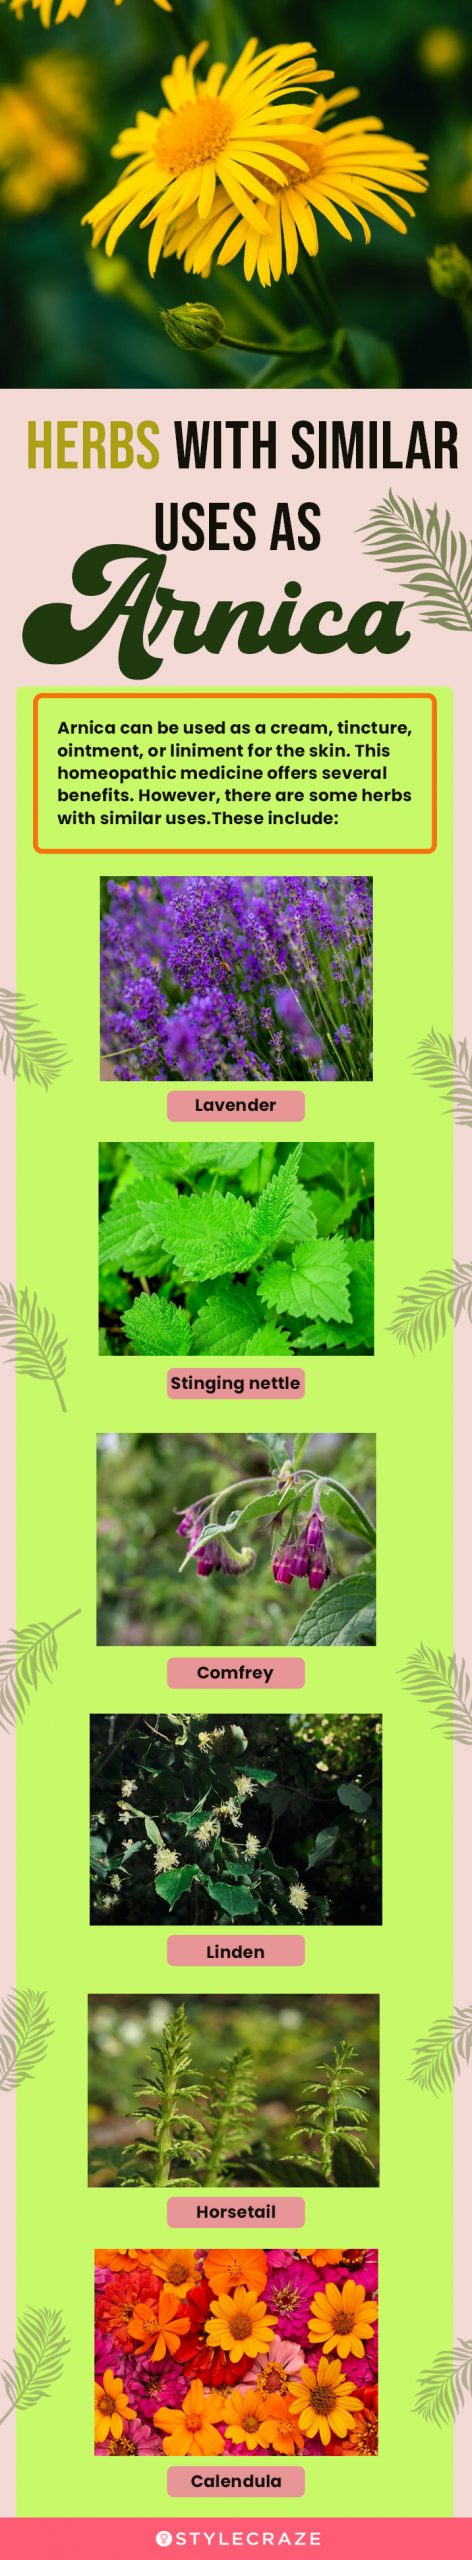 herbs with similar uses a arnica (infographic)